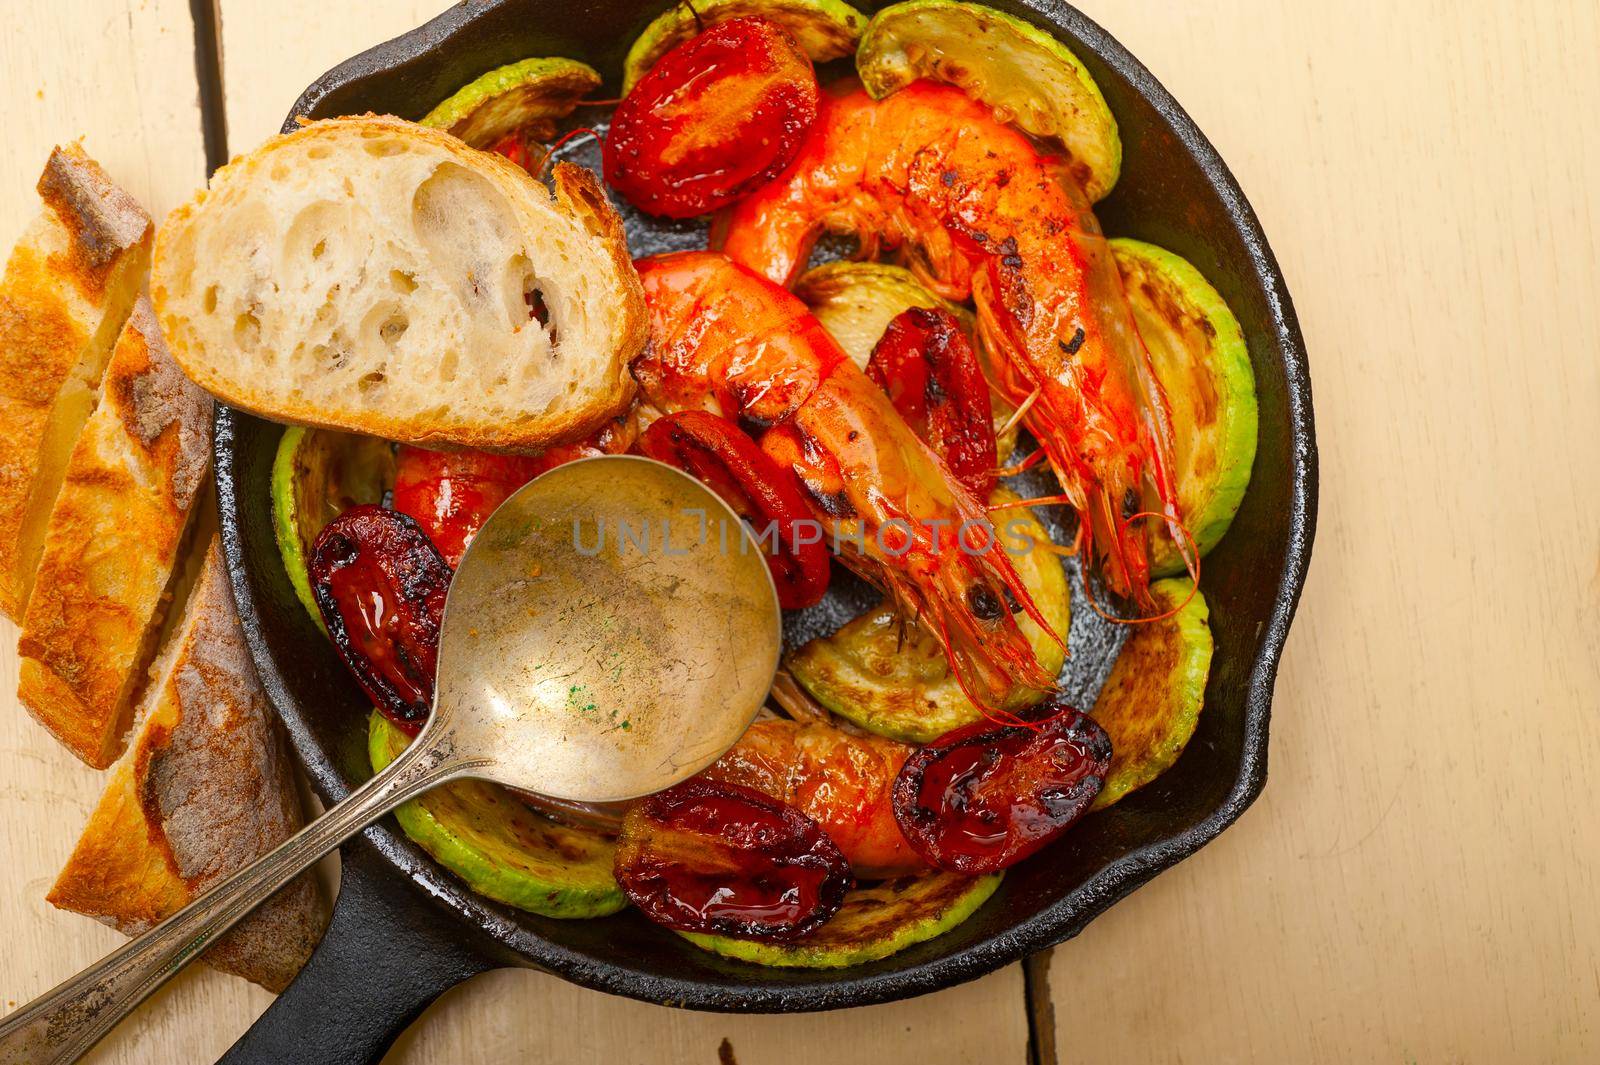 roasted shrimps with zucchini and tomatoes by keko64